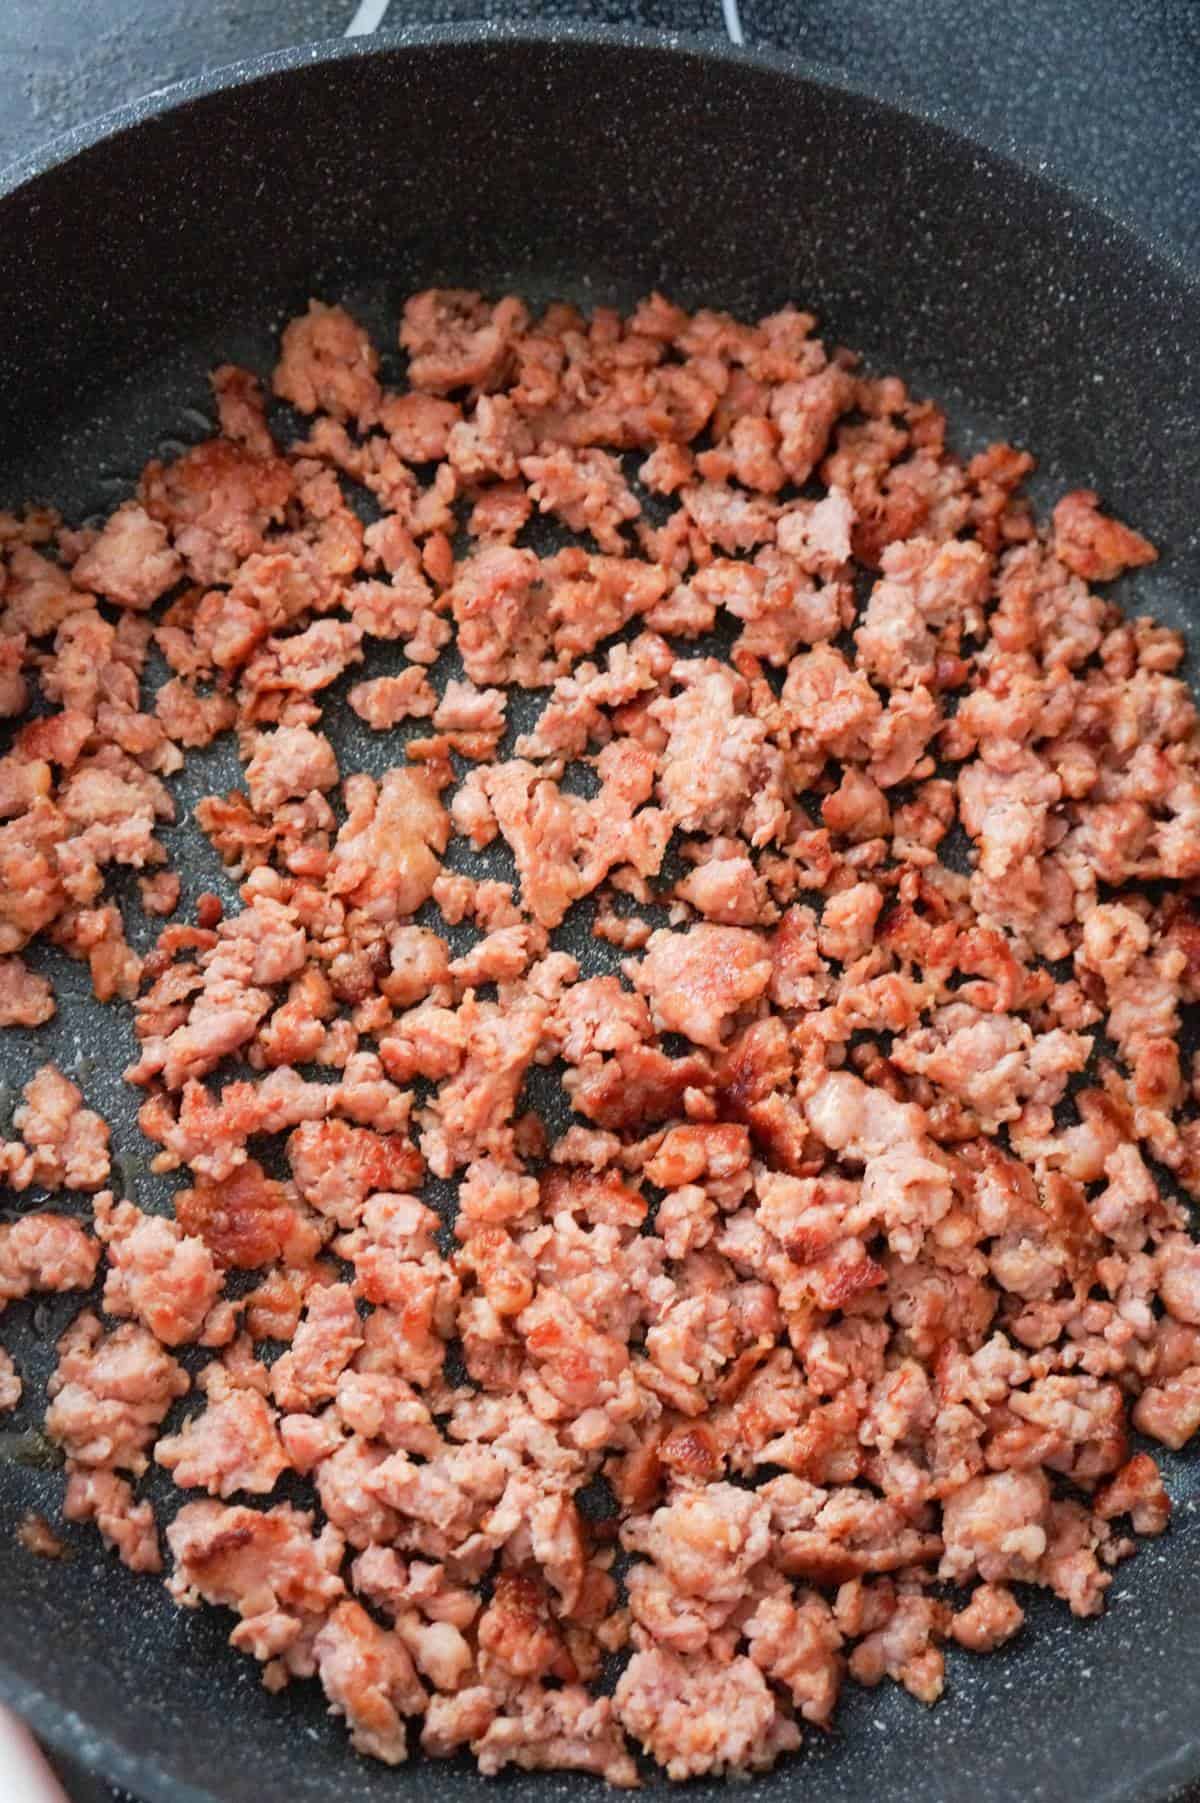 cooked ground sausage meat in a saute pan